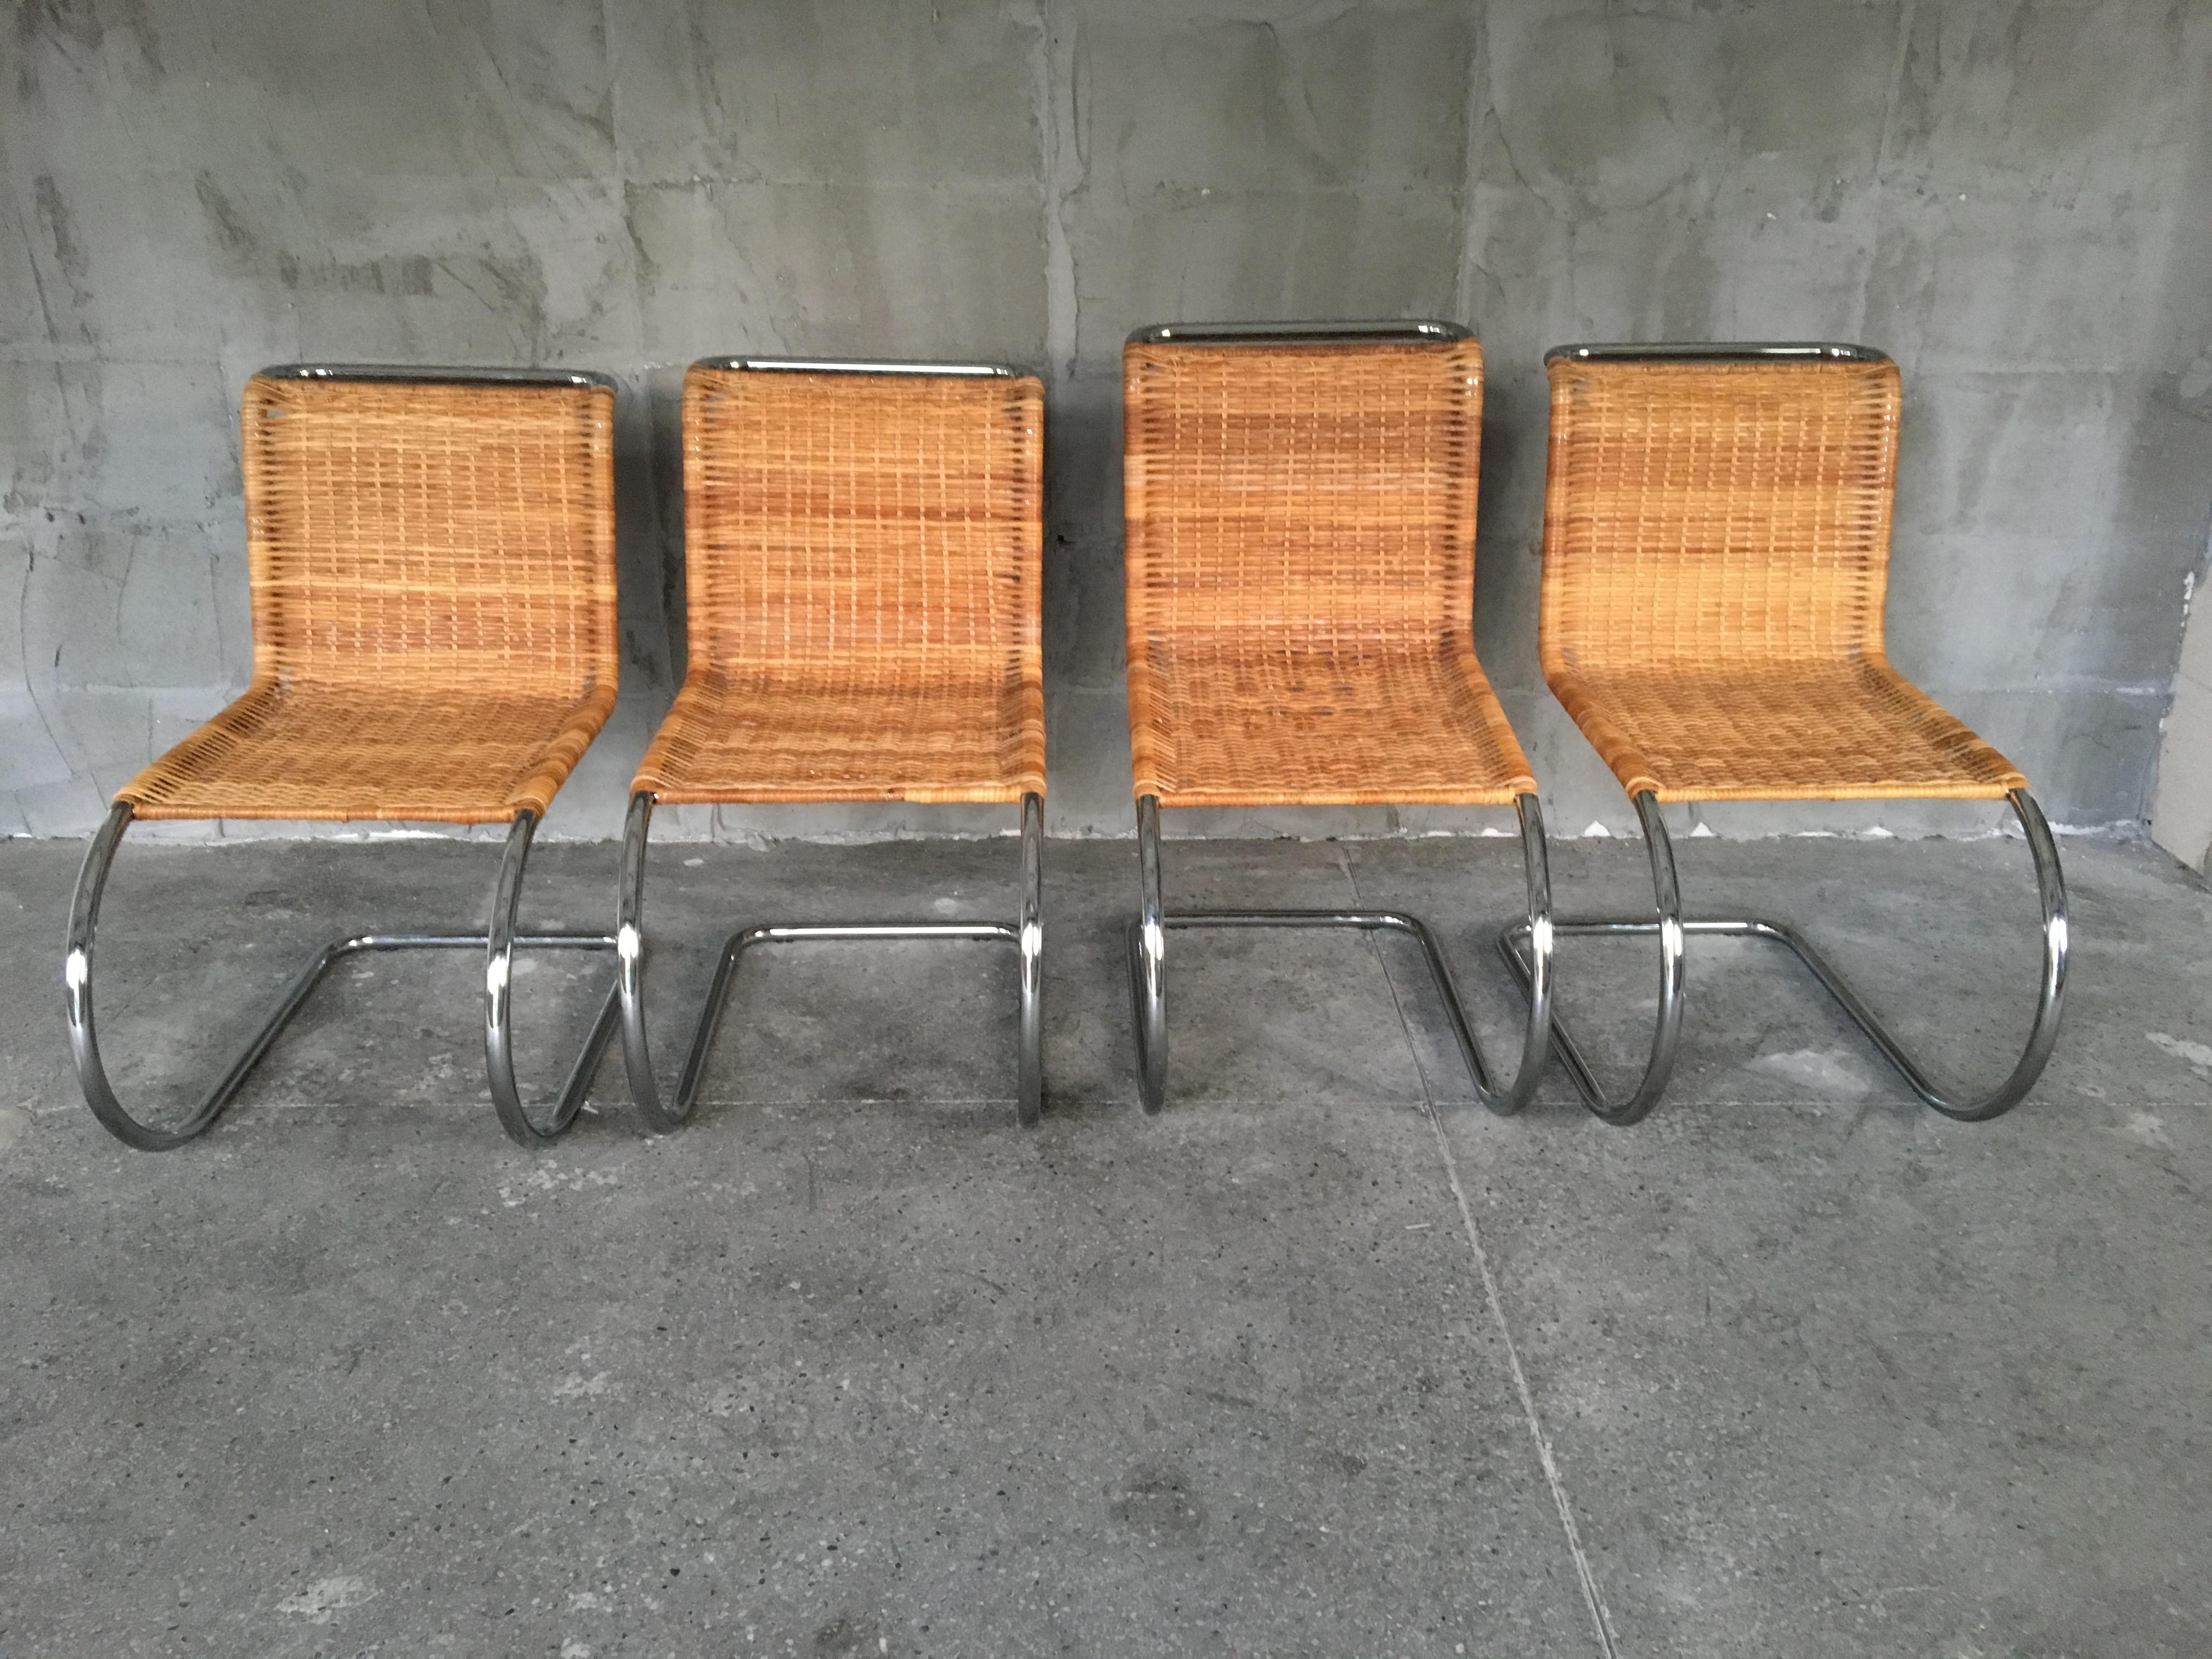 Splendid set of four MR10 rattan and chrome chairs of the renowned designer Ludwig Mies van der Rohe. The set was sollected for a while from France. One of the chair has small damages on the rattan as is shown on the picture.